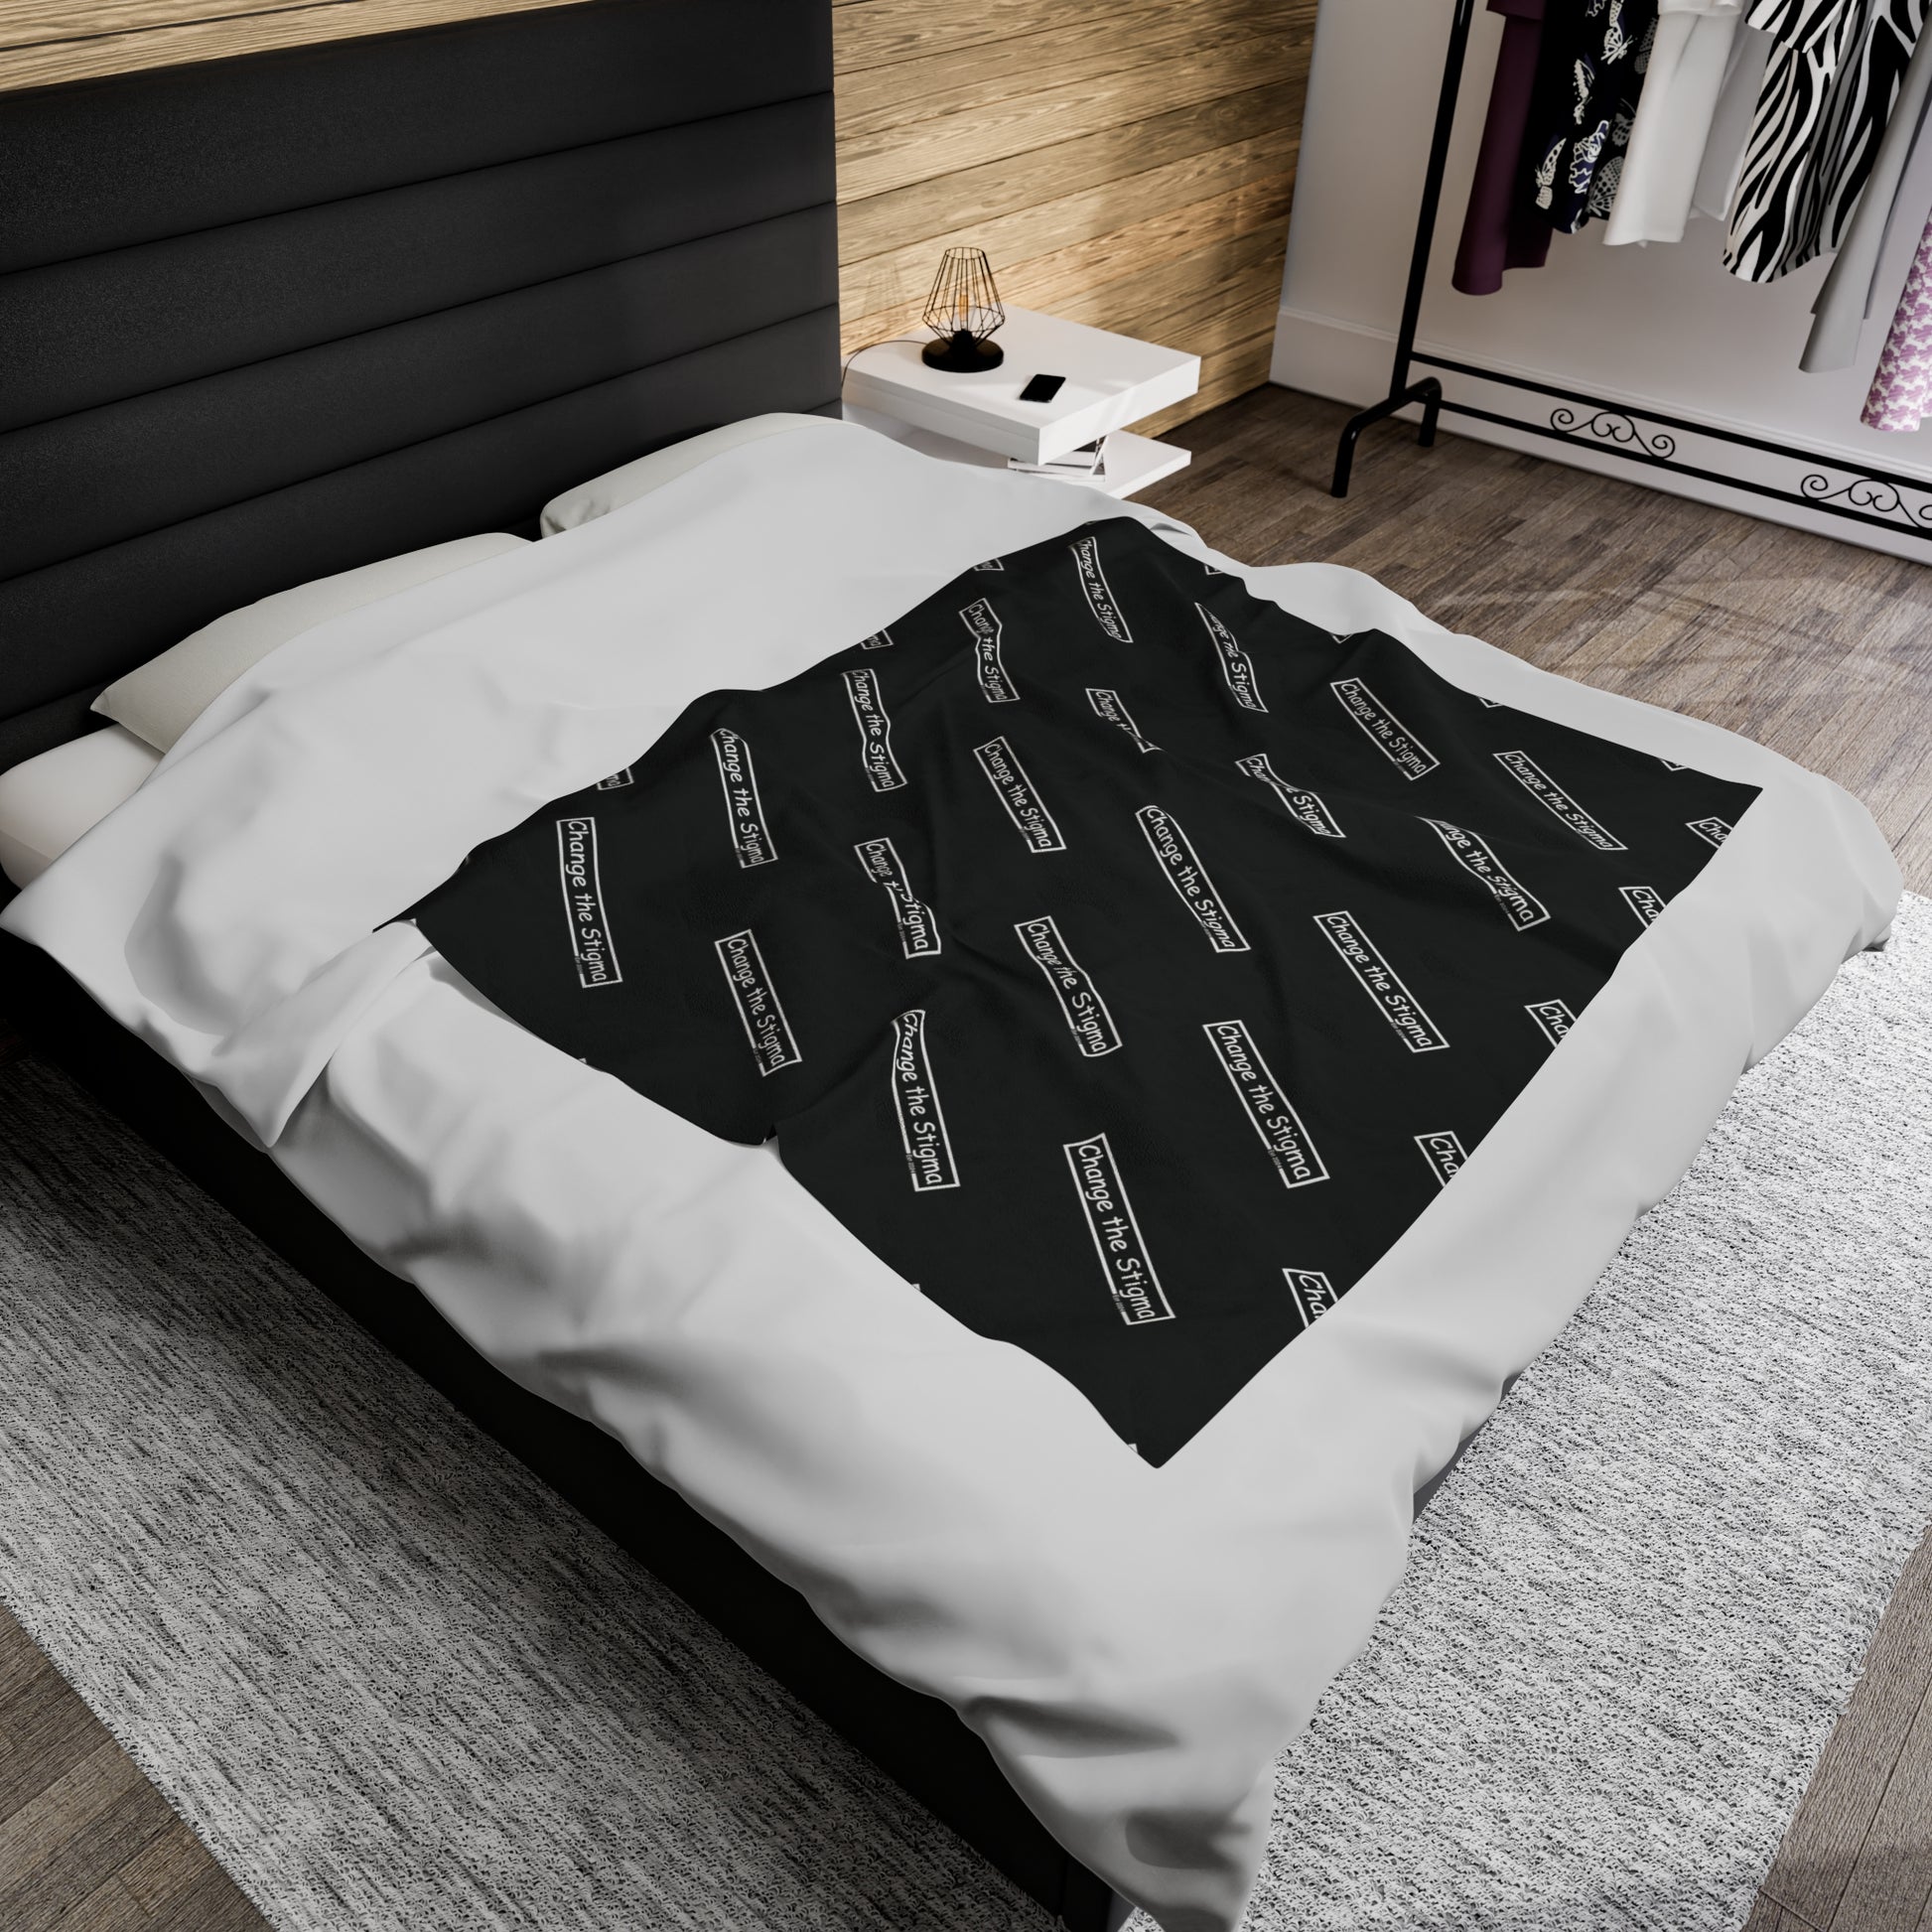 Blanket shown on a large bed. BLACK FLEECE BLANKET 50"x60". This is showing the top of the image. the words "Change the Stigma" across is on a pattern.